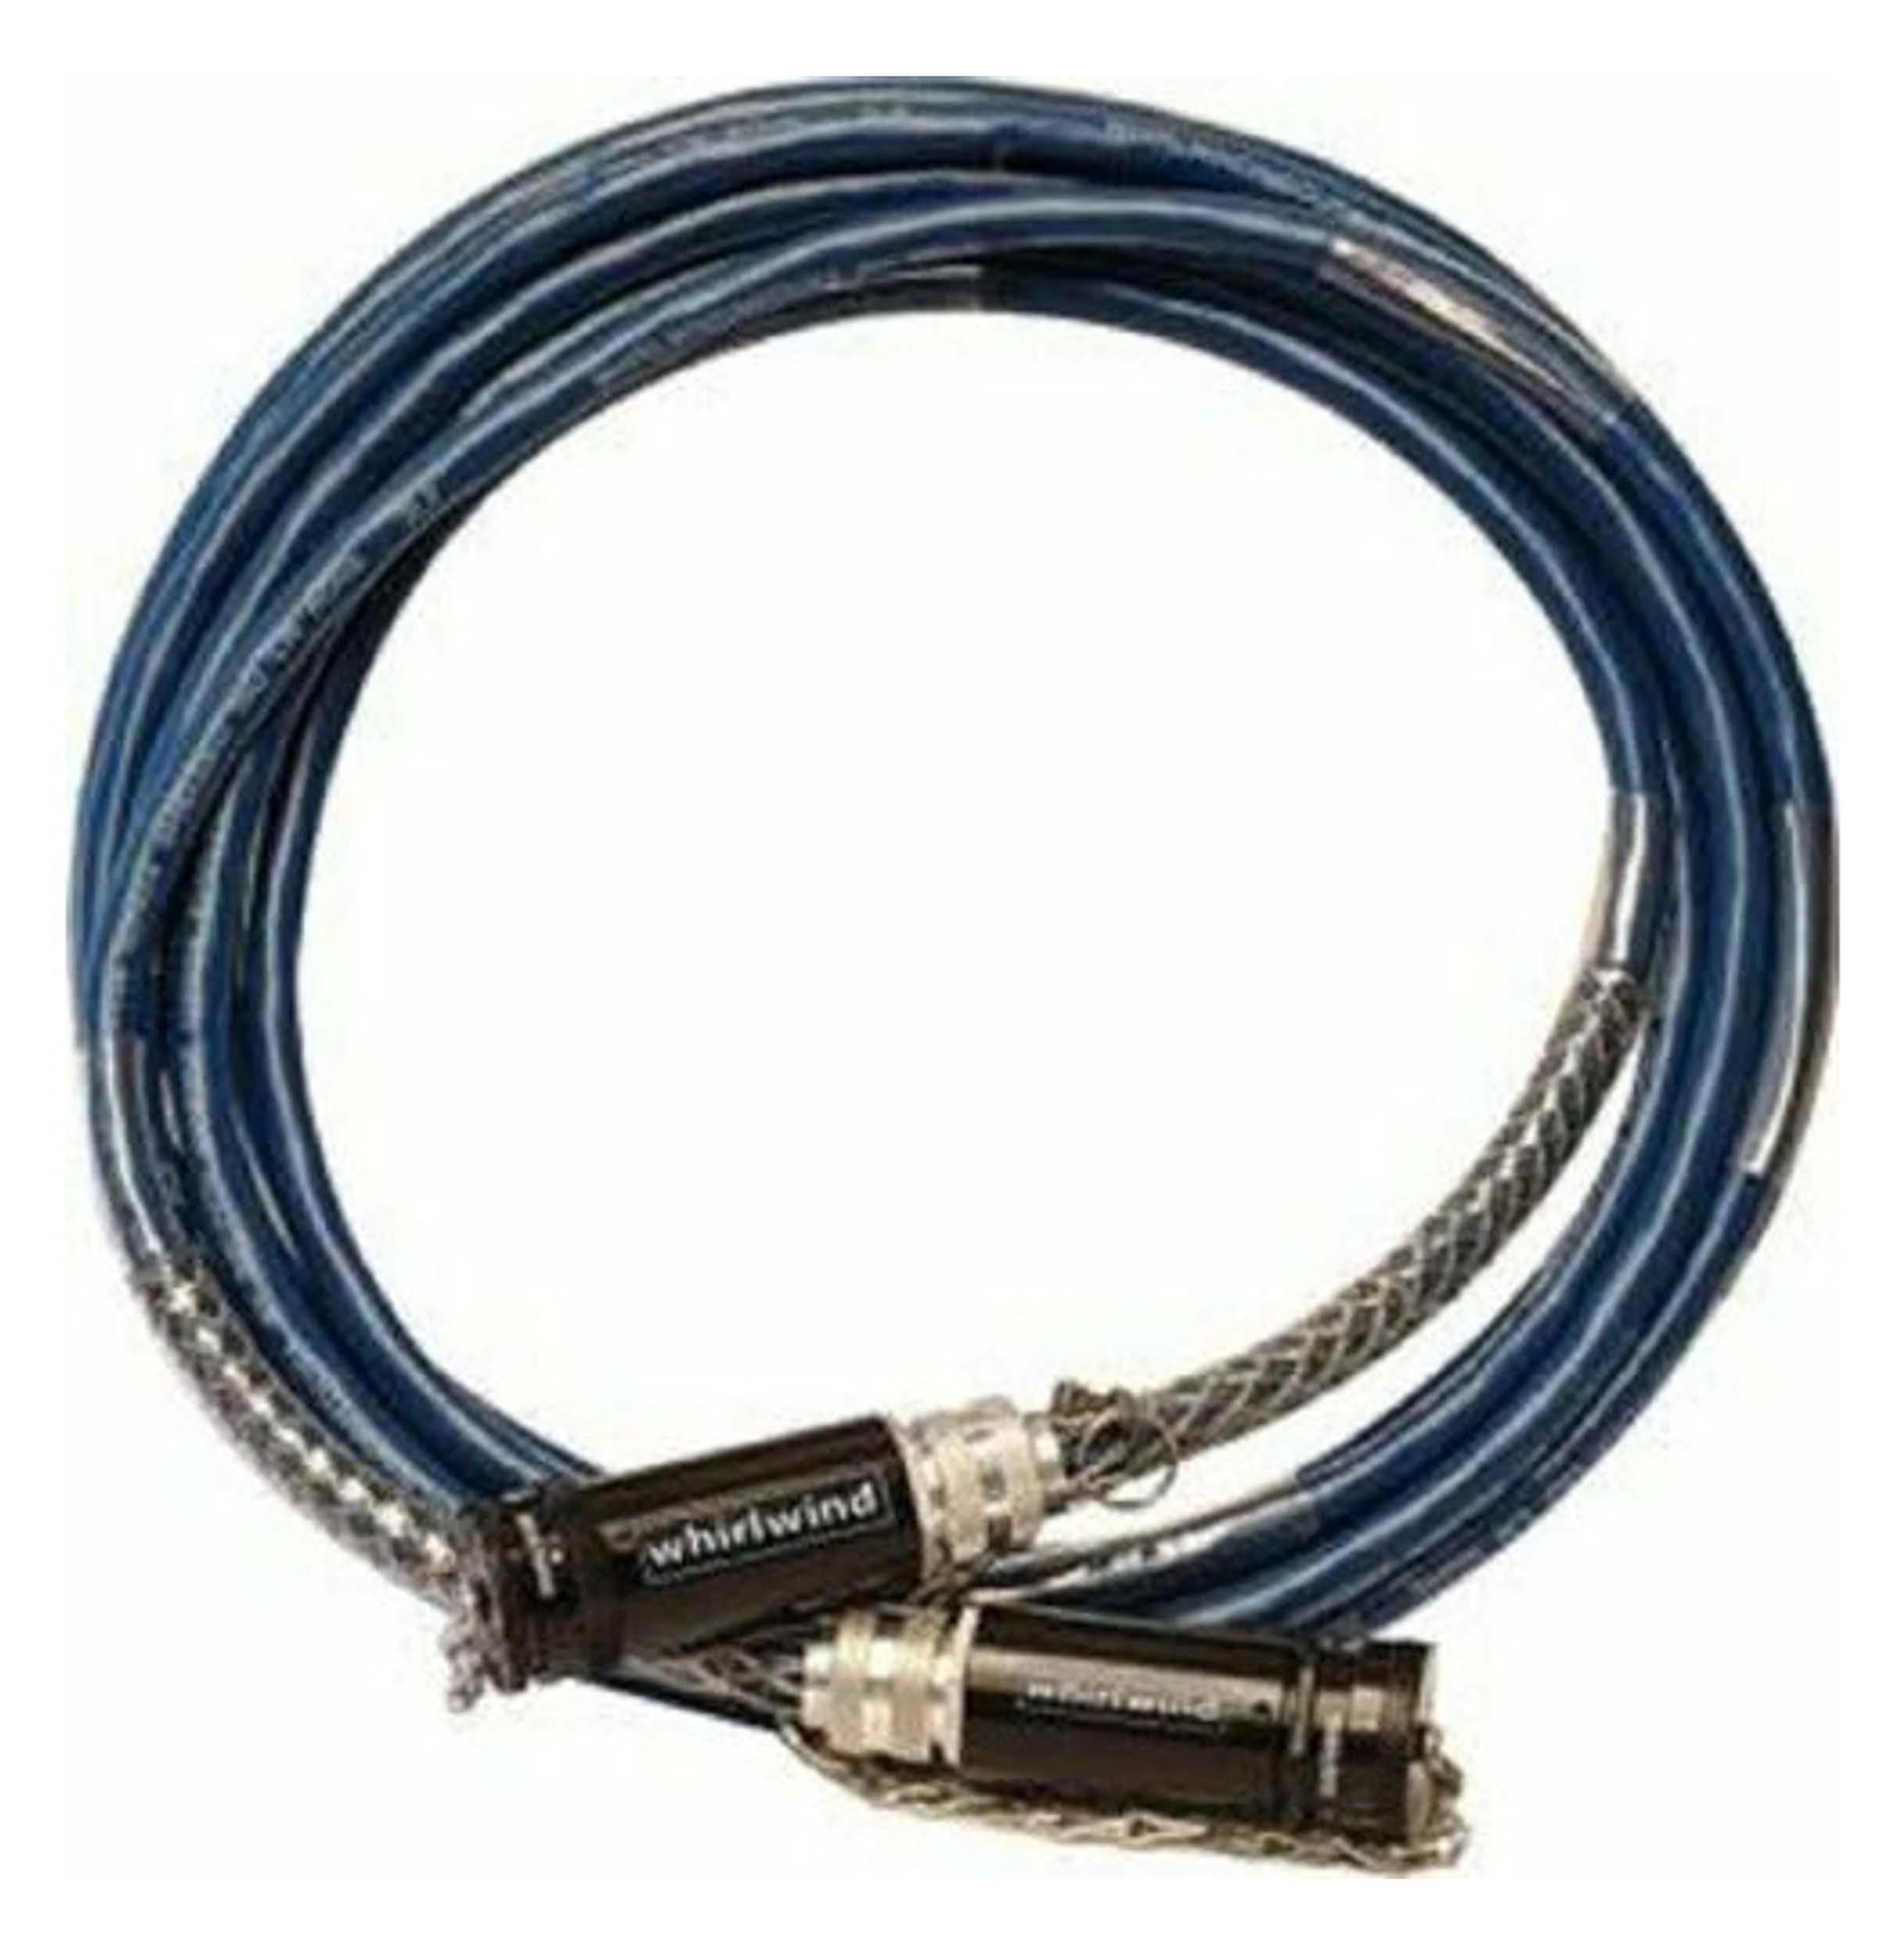 Whirlwind C12075W1MF C Series 12 channel Multicore Mass Cable W1IF to W1IM - 75FT by Whirlwind